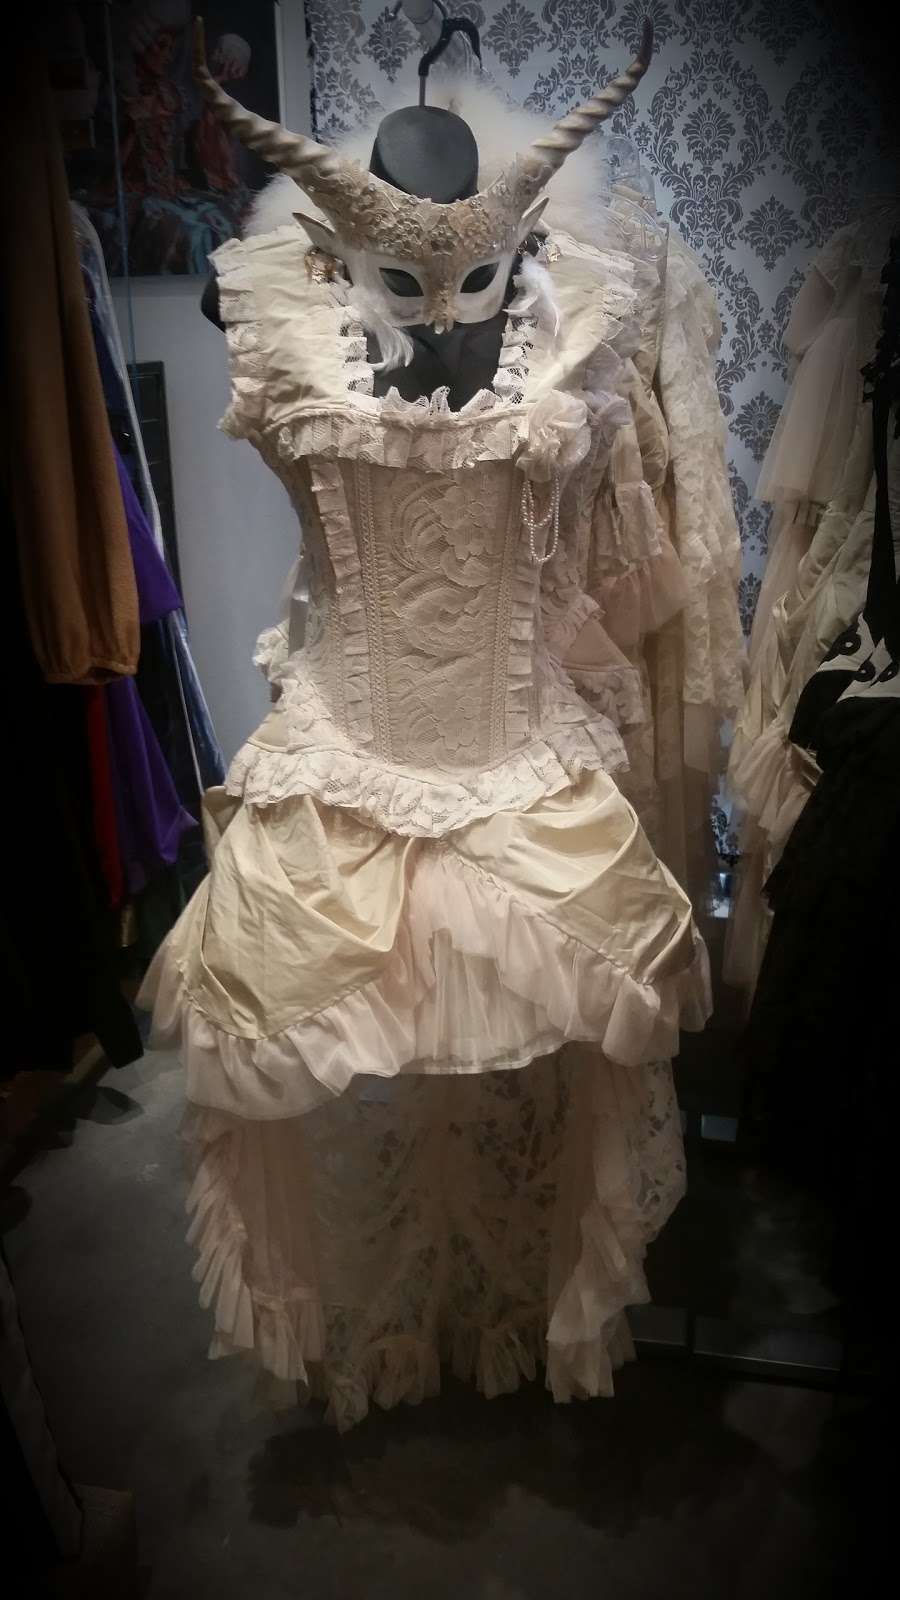 Behind the Scenes Costumes | 285 W 6th St Suite 102, San Pedro, CA 90731 | Phone: (310) 521-9000